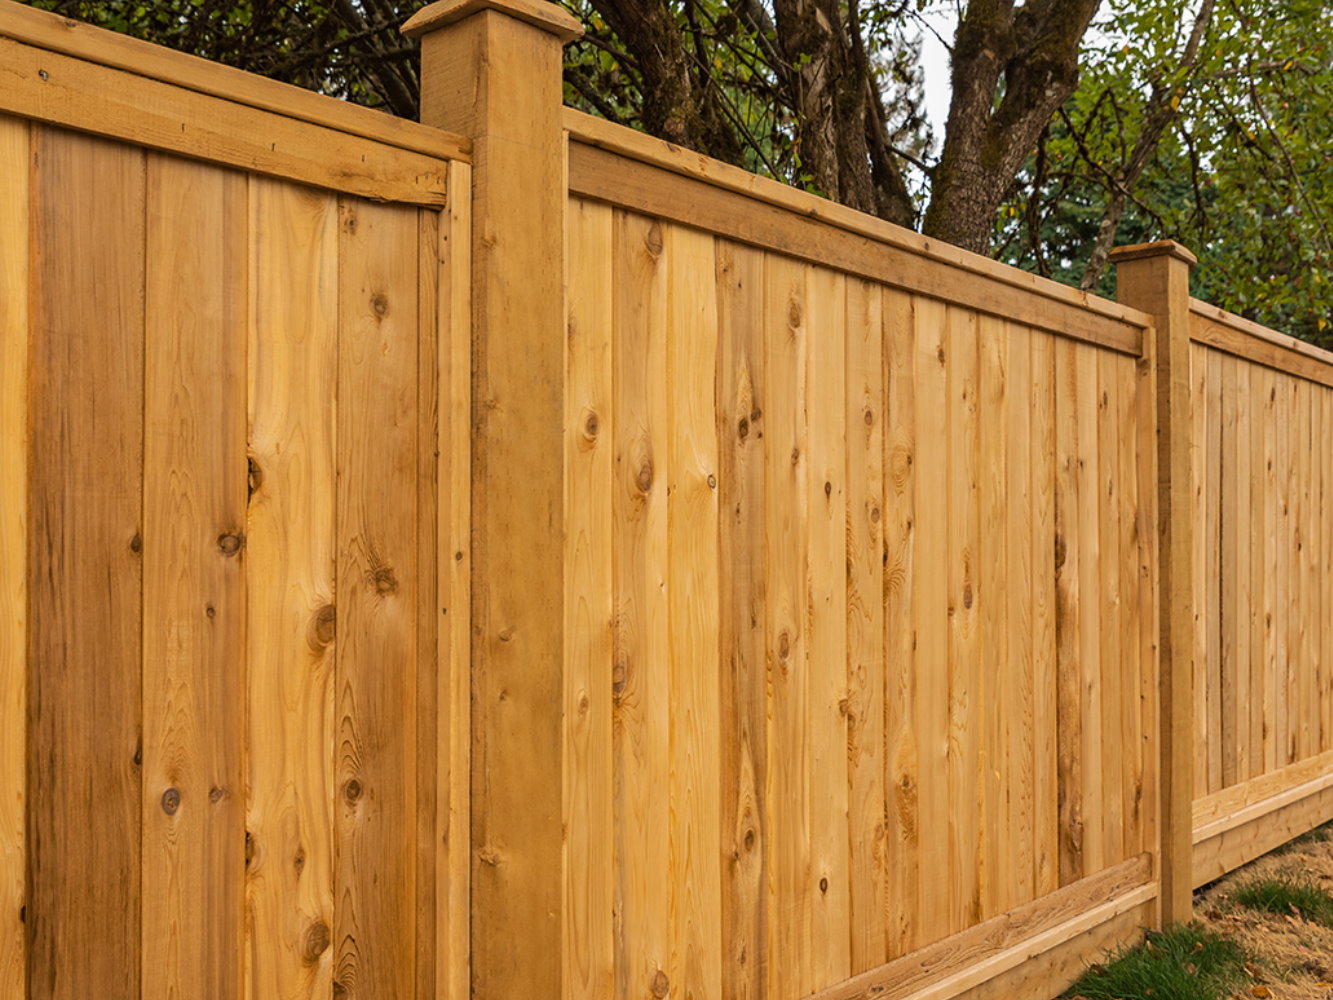 Moseley VA cap and trim style wood fence